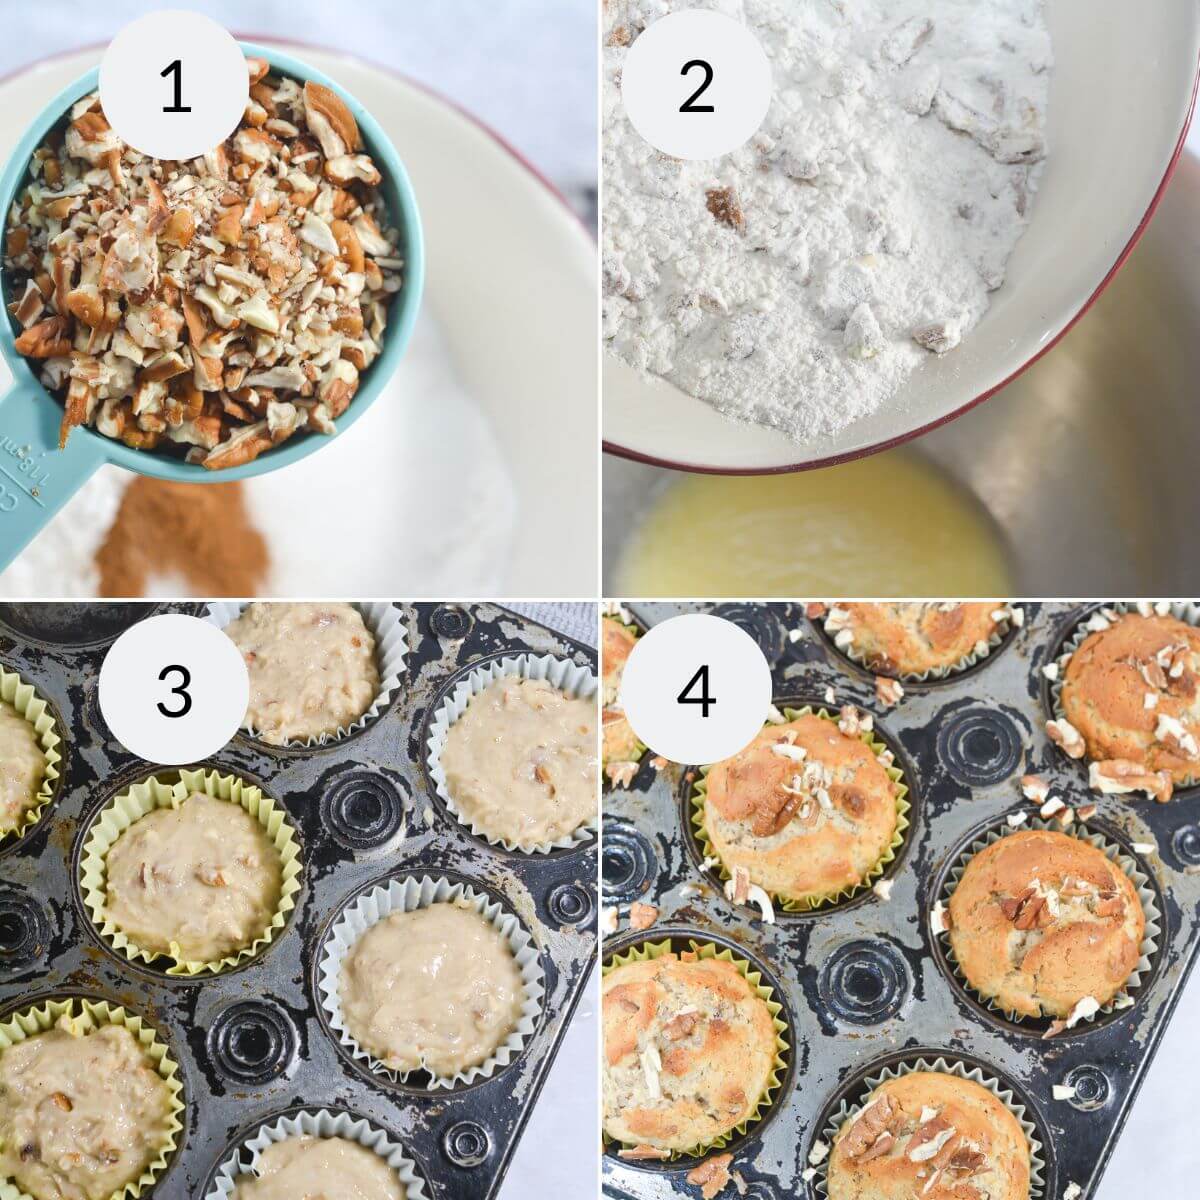 Add the nuts and filling in the muffin pan.